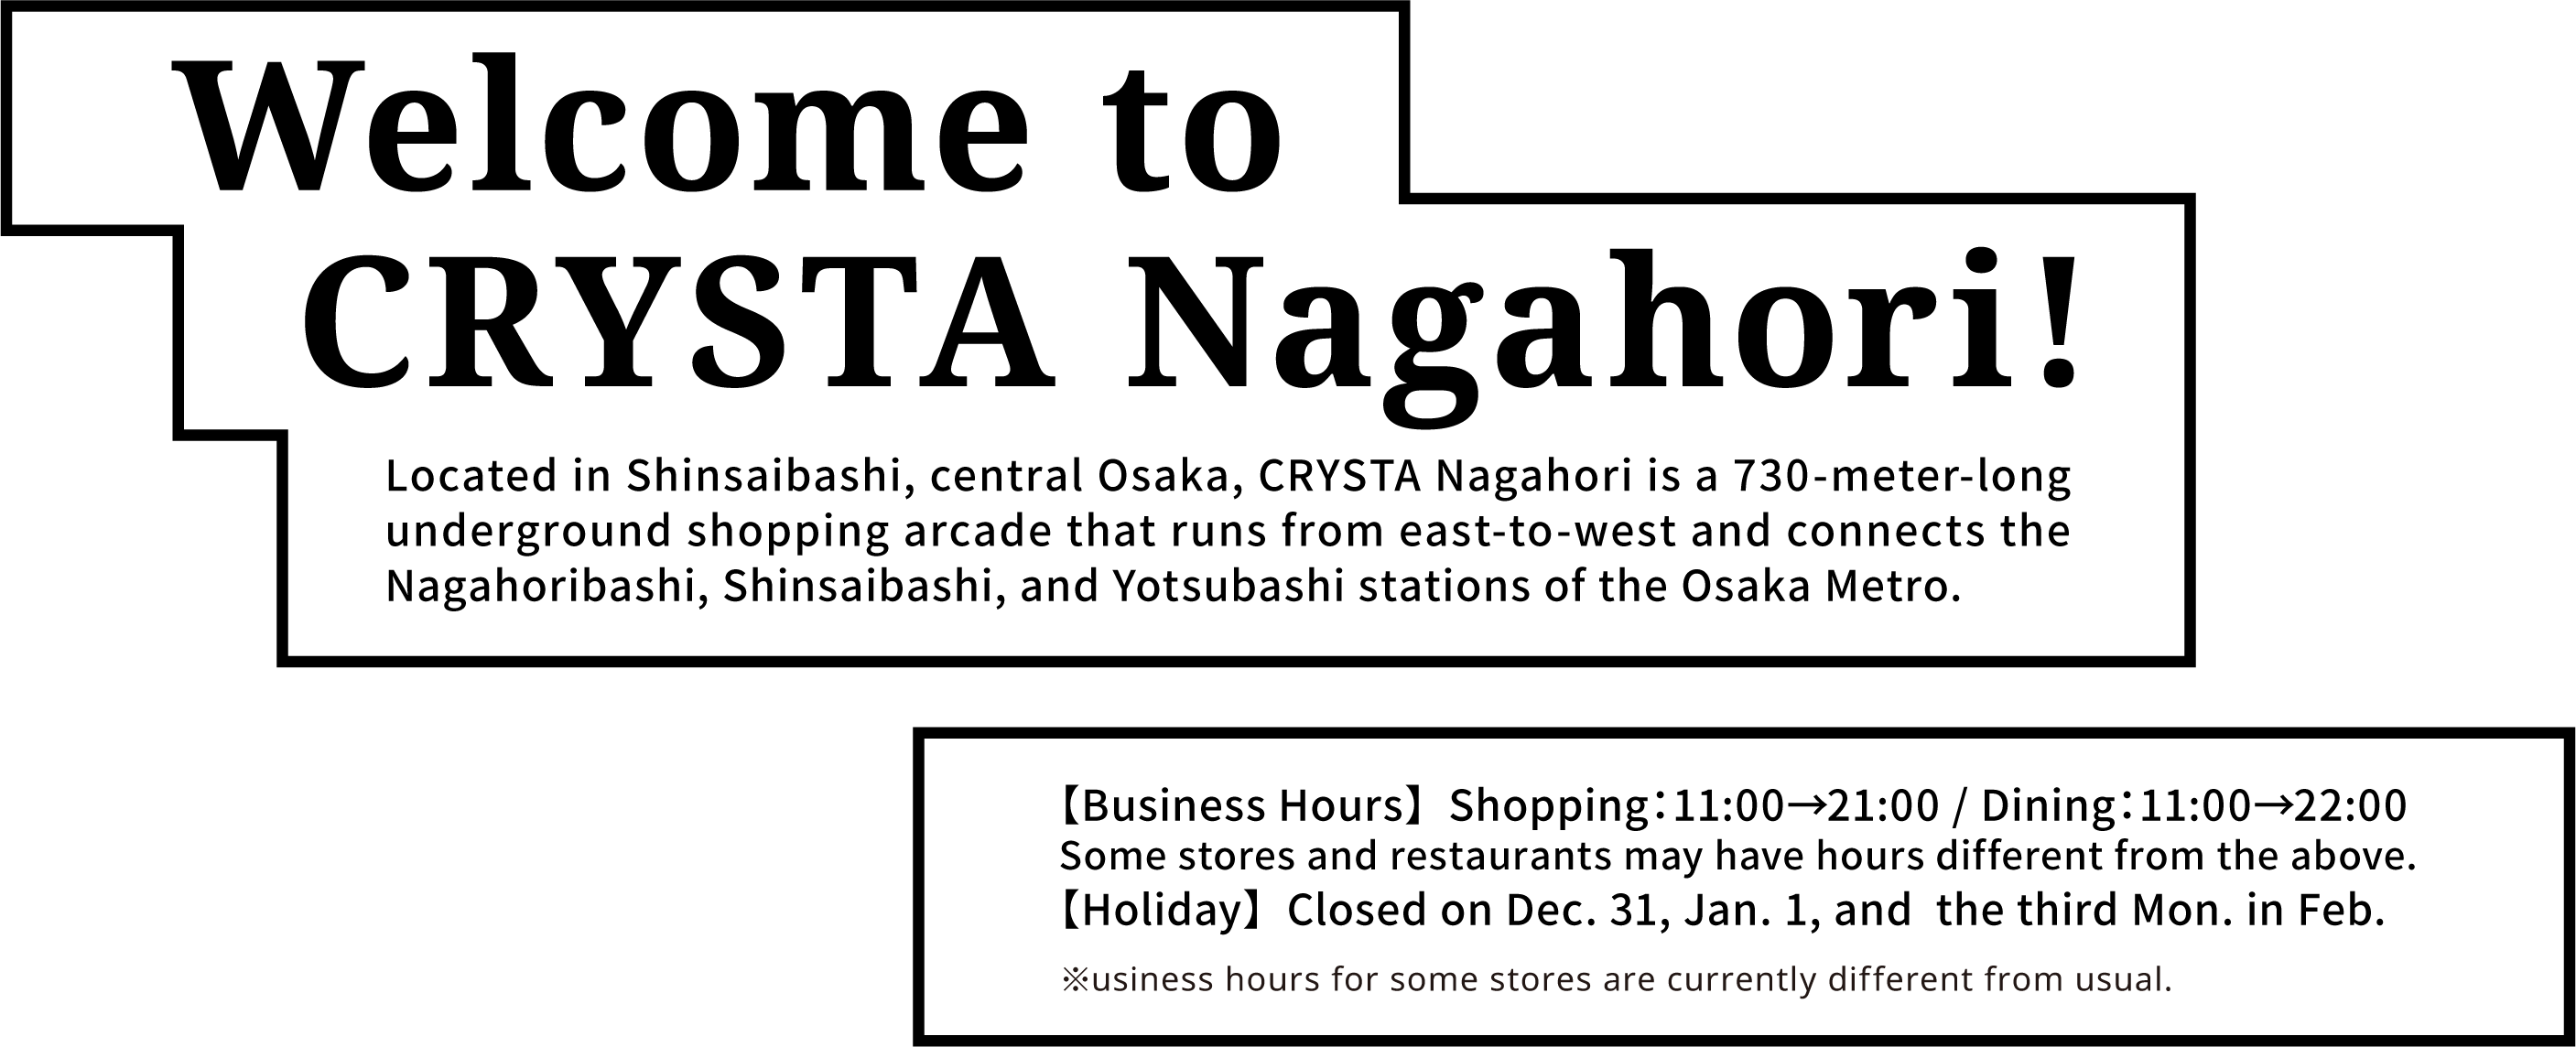 Welcome to CRYSTA Nagahori! Located in Shinsaibashi, central Osaka, CRYSTA Nagahori is a 730-meter-long underground shopping arcade that runs from east-to-west and connects the Nagahoribashi, Shinsaibashi, and Yotsubashi stations of the Osaka Metro. 【Business Hours】  Shopping：11:00→21:00 / Dining：11:00→22:00 Some stores and restaurants may have hours different from the above. 【Holiday】  Closed on Dec. 31, Jan. 1, and  the third Mon. in Feb. ※usiness hours for some stores are currently different from usual.